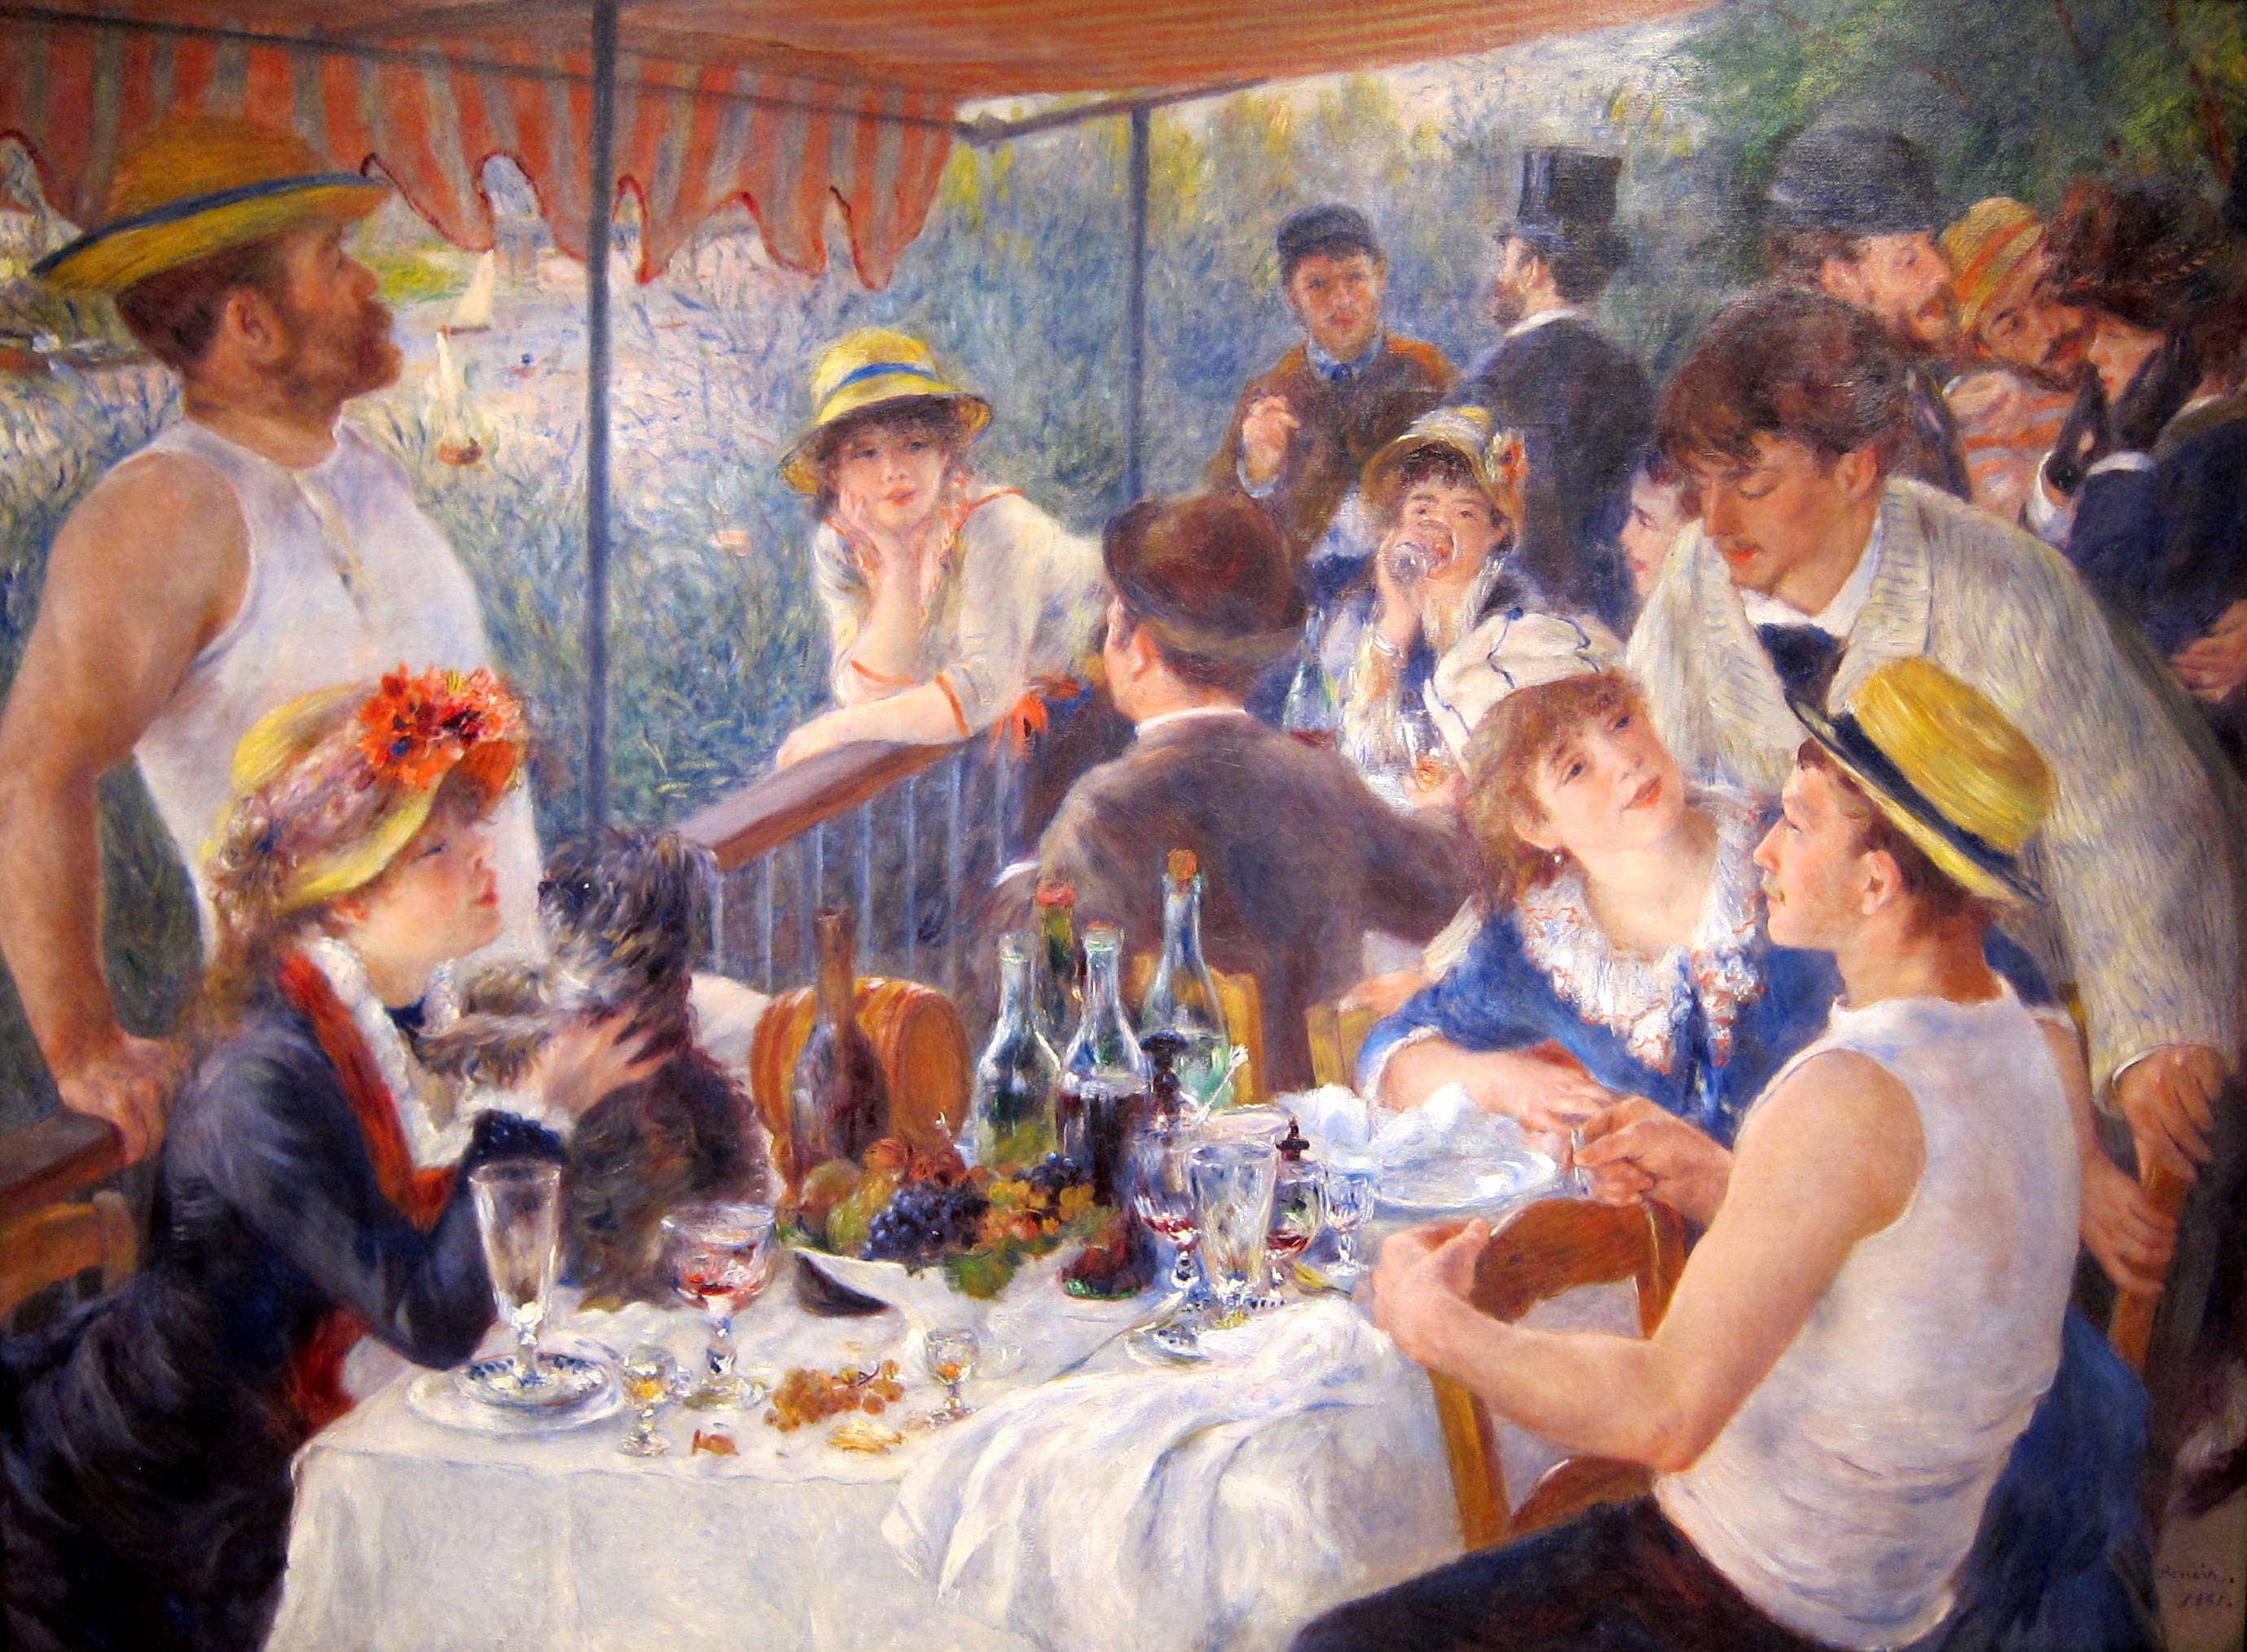 Luncheon of the Boating Party by Pierre-Auguste Renoir - 1880 - 129.9 × 172.7 cm The Phillips Collection